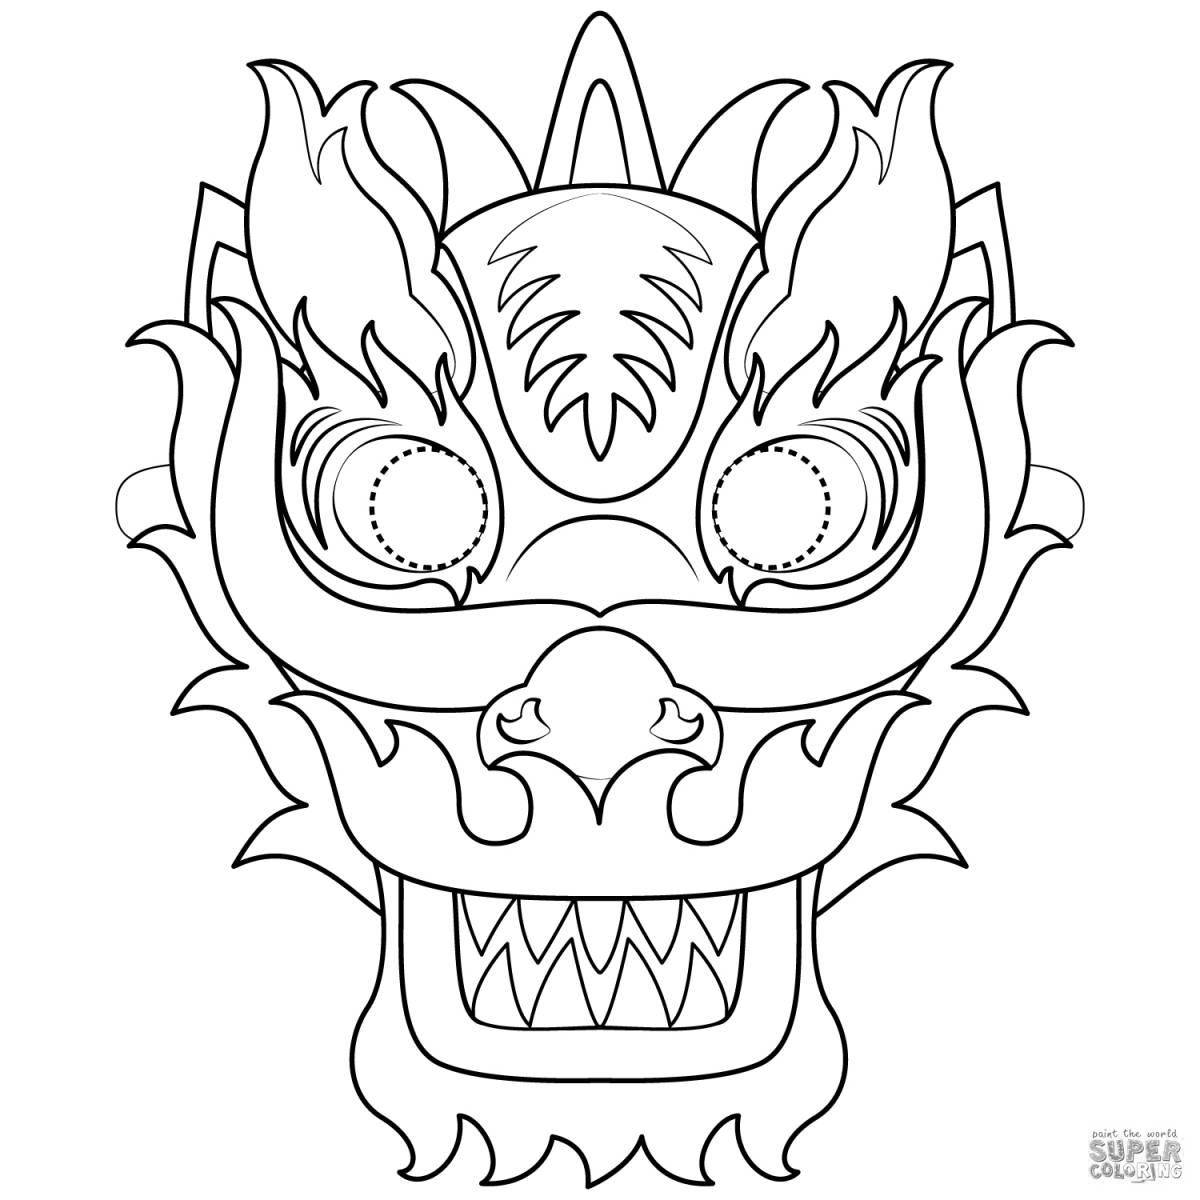 Decorated dragon head coloring book